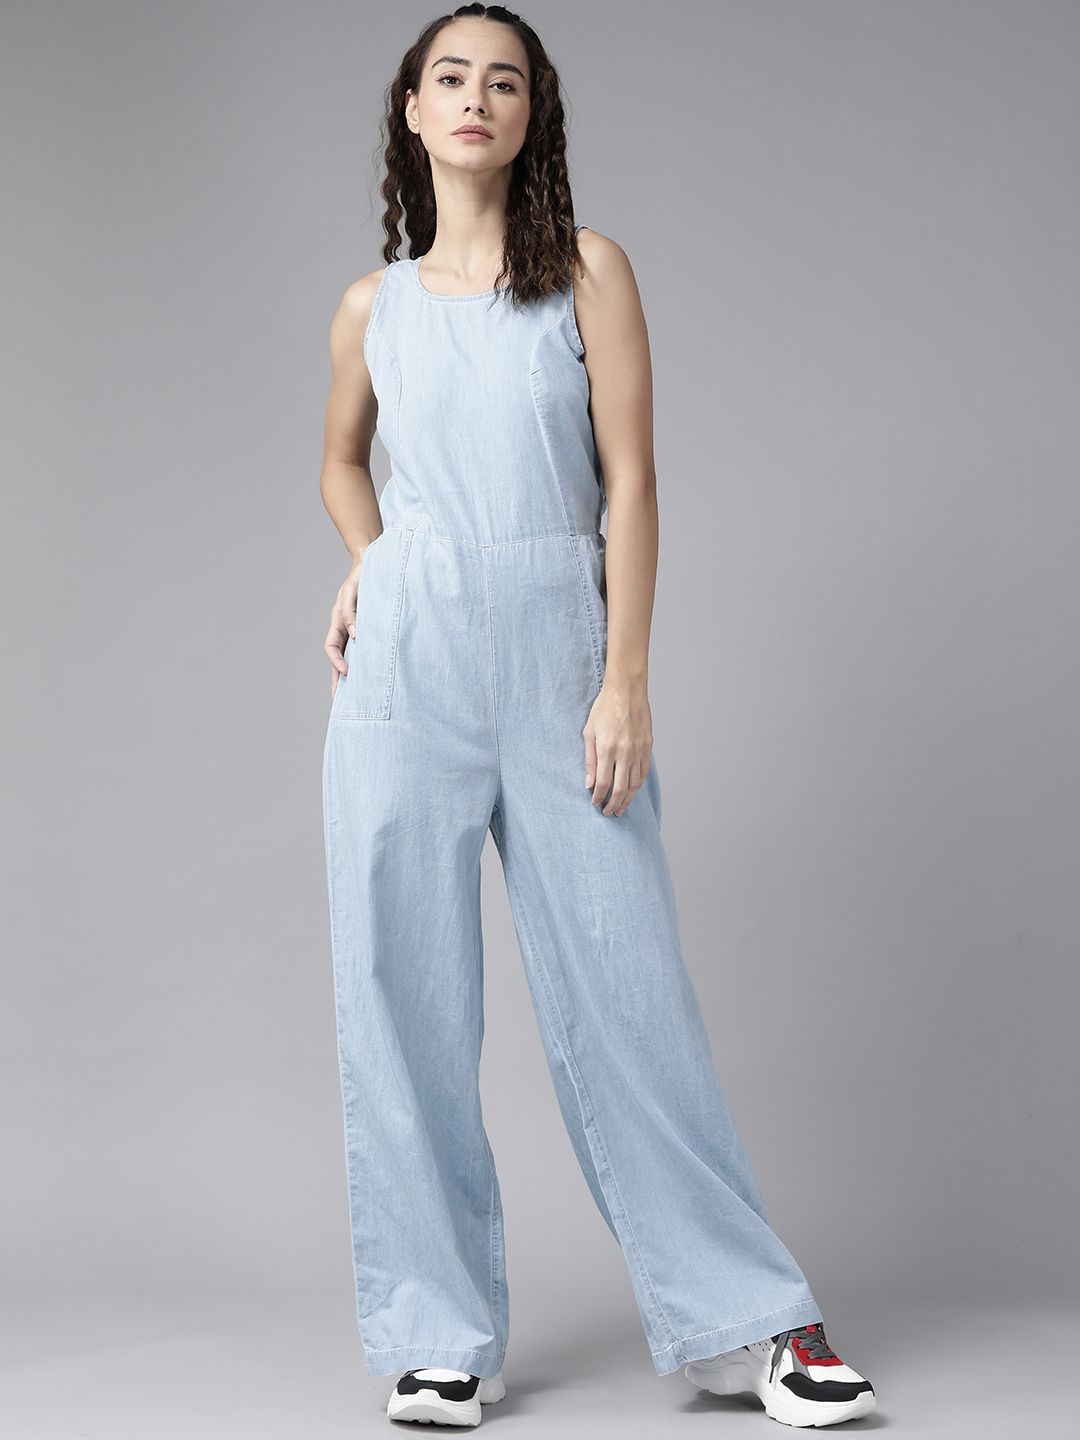 The Roadster Lifestyle Co Blue Pure Cotton Solid Wide Leg Jumpsuit with Tie-Up Back Price in India